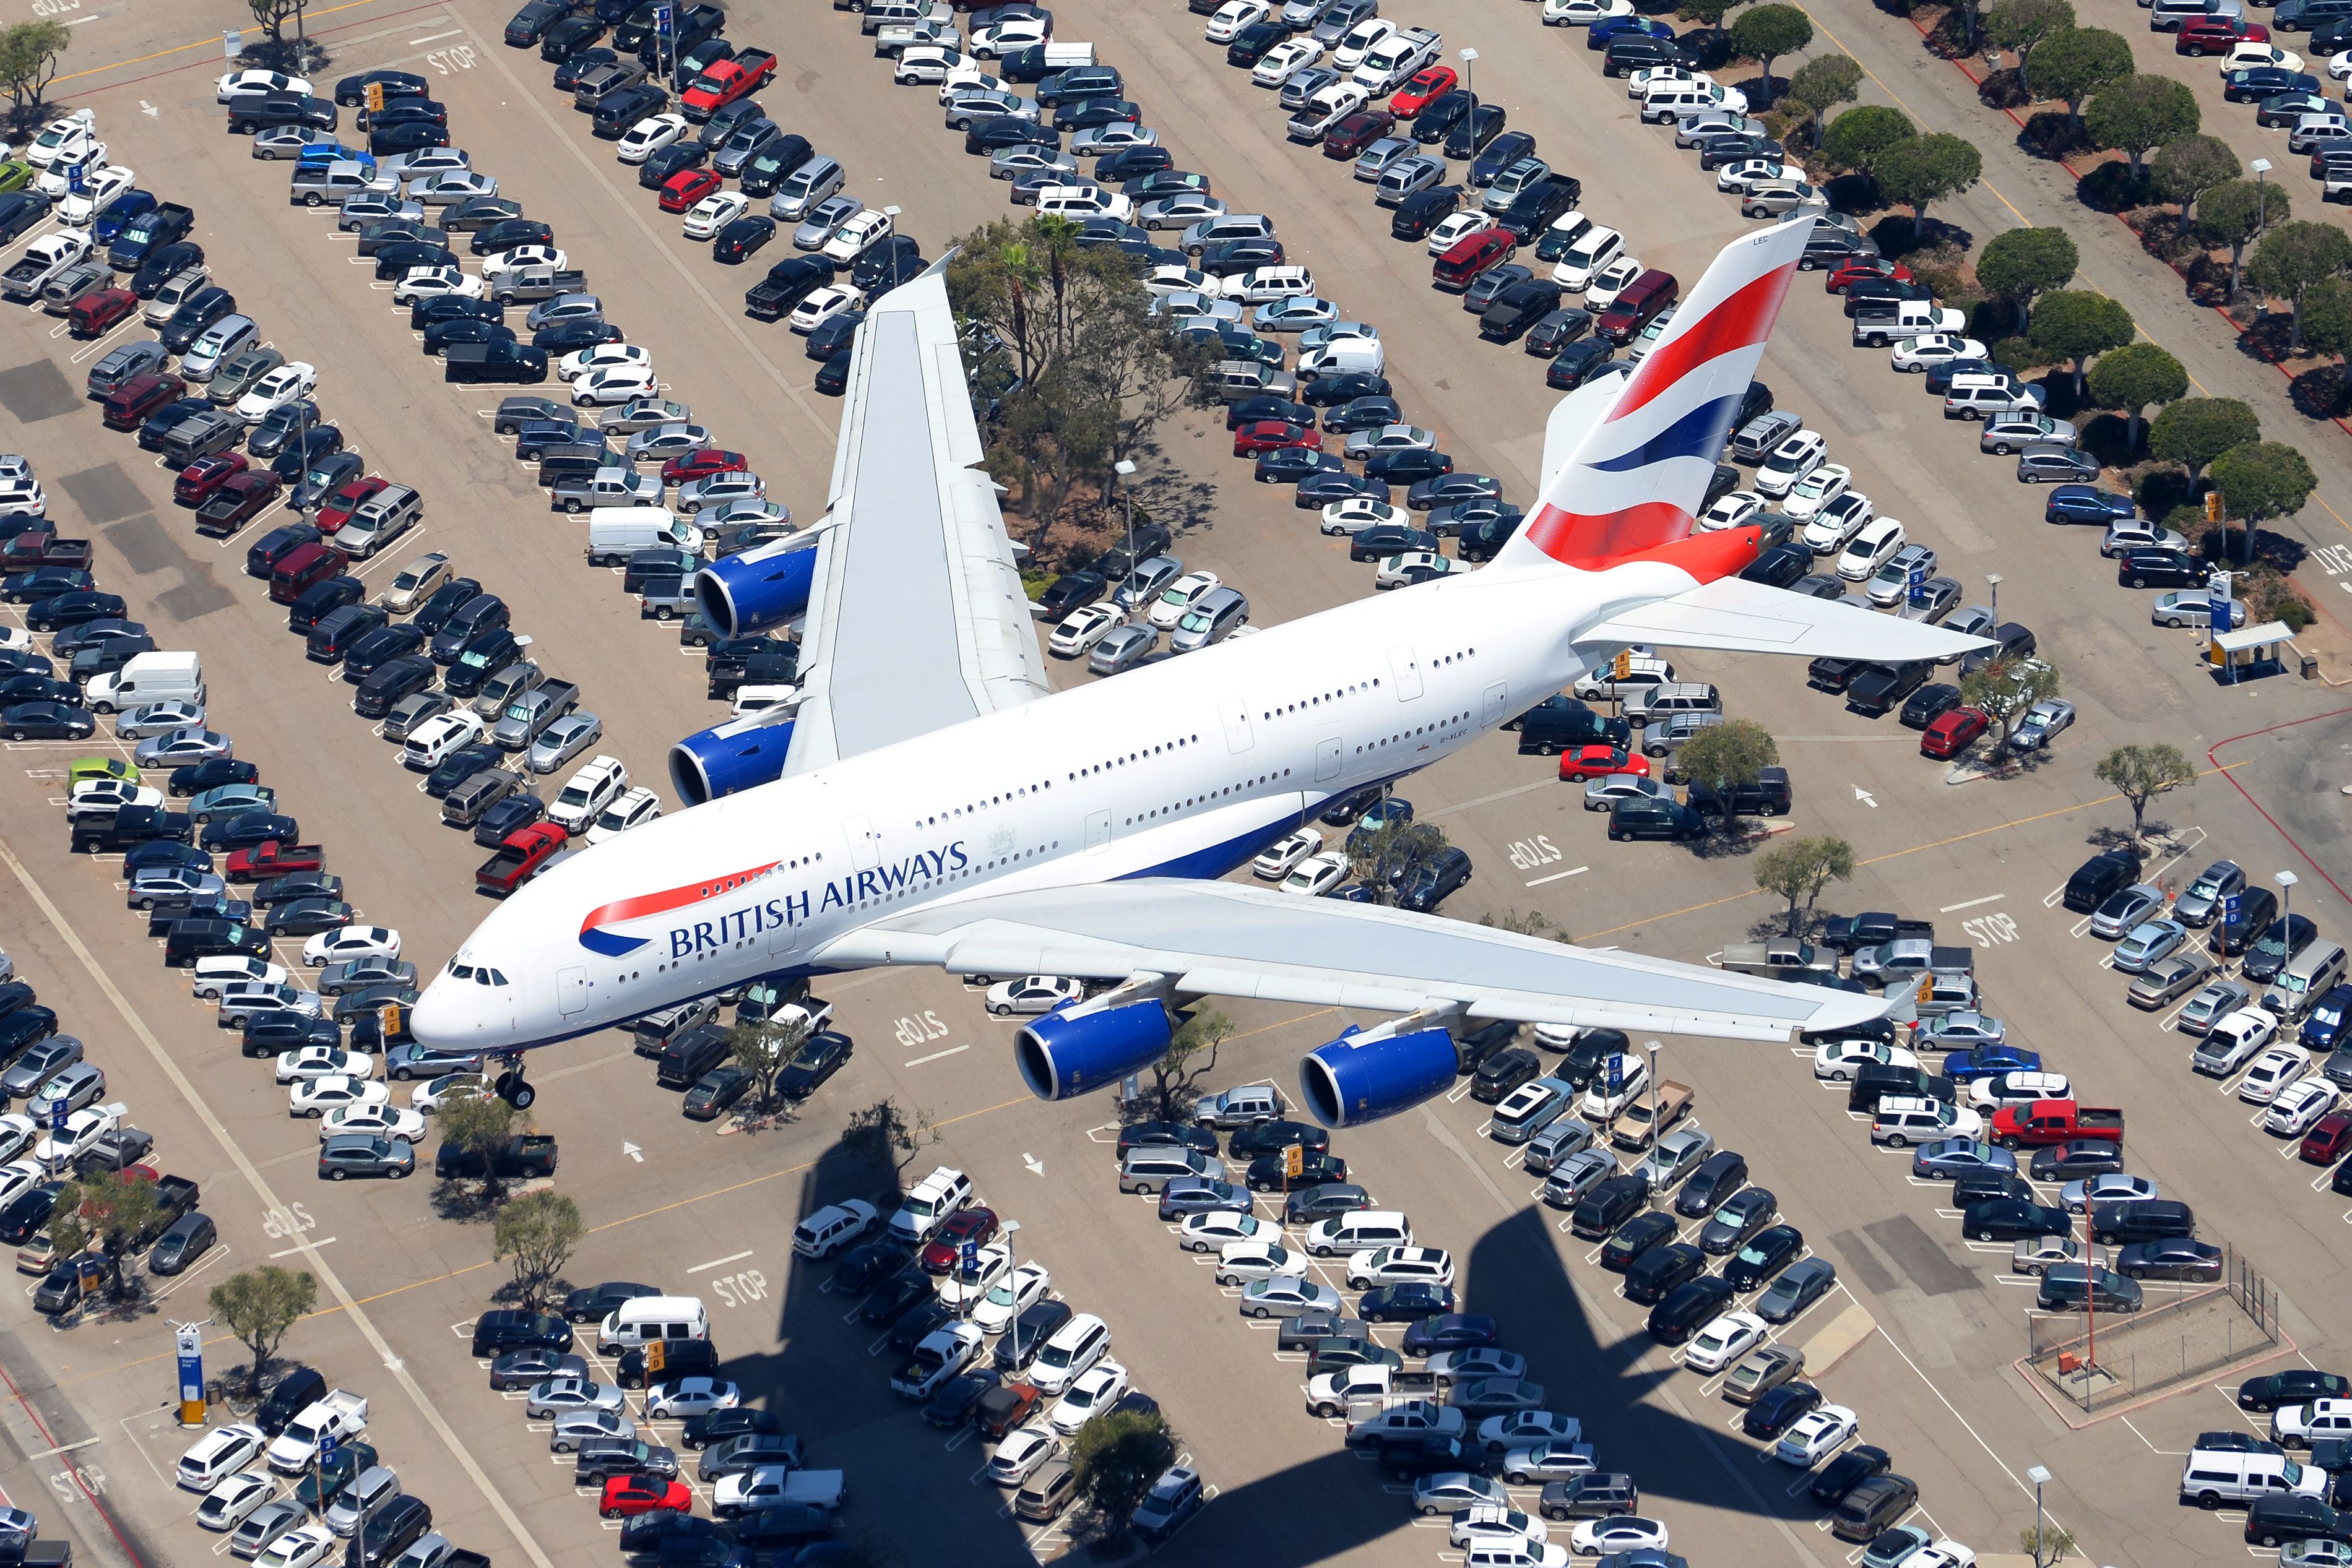 A British Airways Airbus A380 flying over parked cars